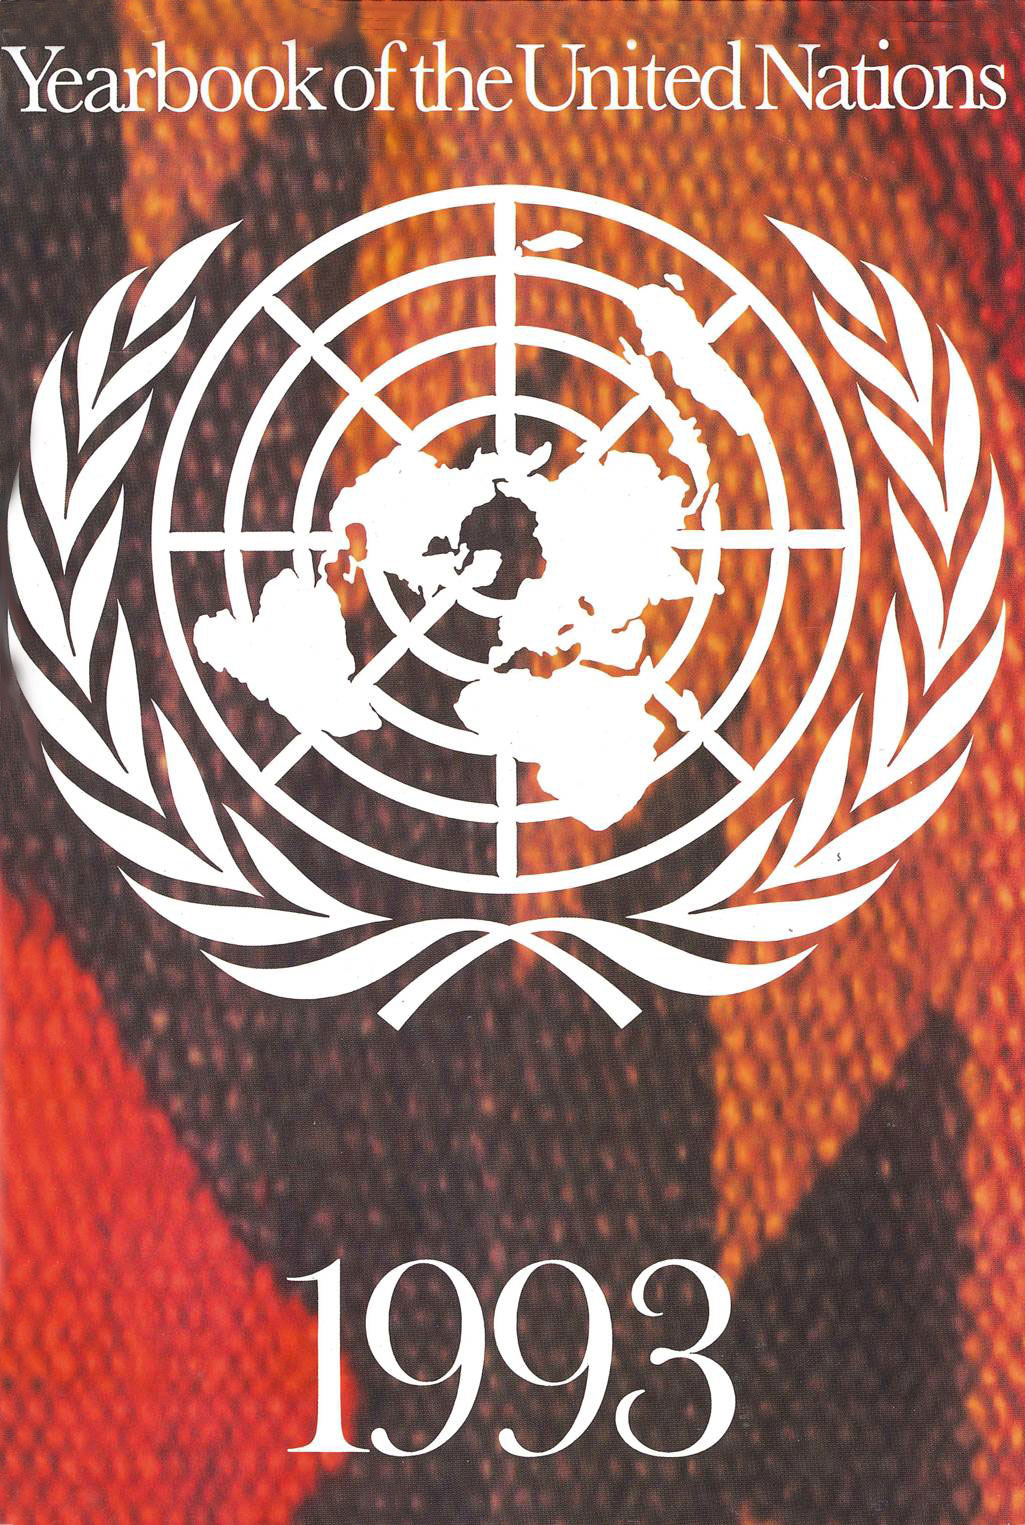 image of Yearbook of the United Nations 1993